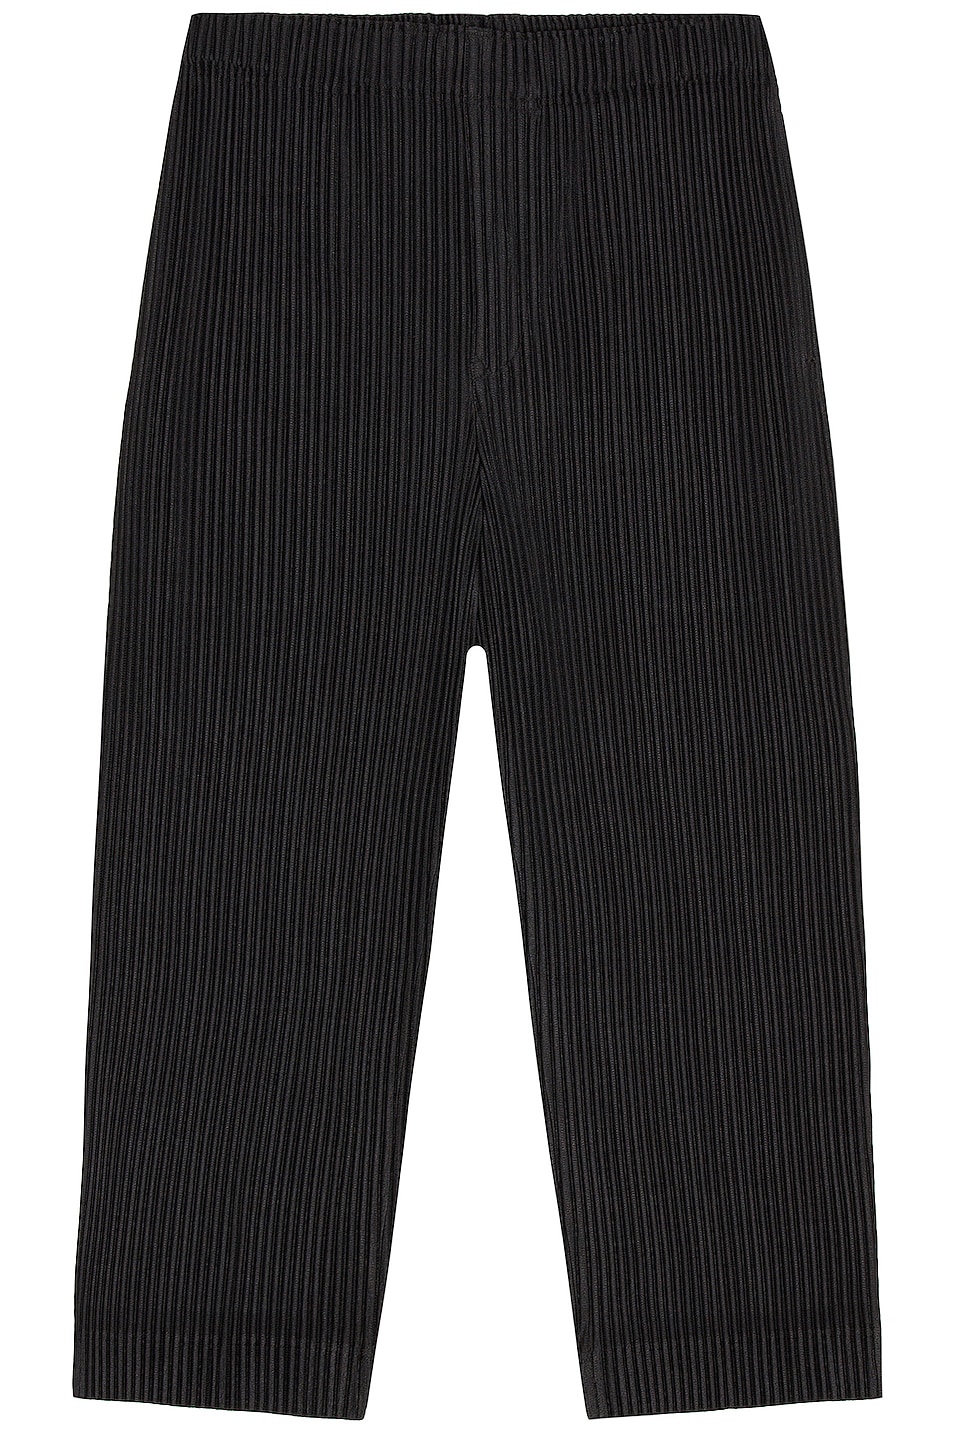 Image 1 of Homme Plisse Issey Miyake Pleats Bottoms 1 in Black